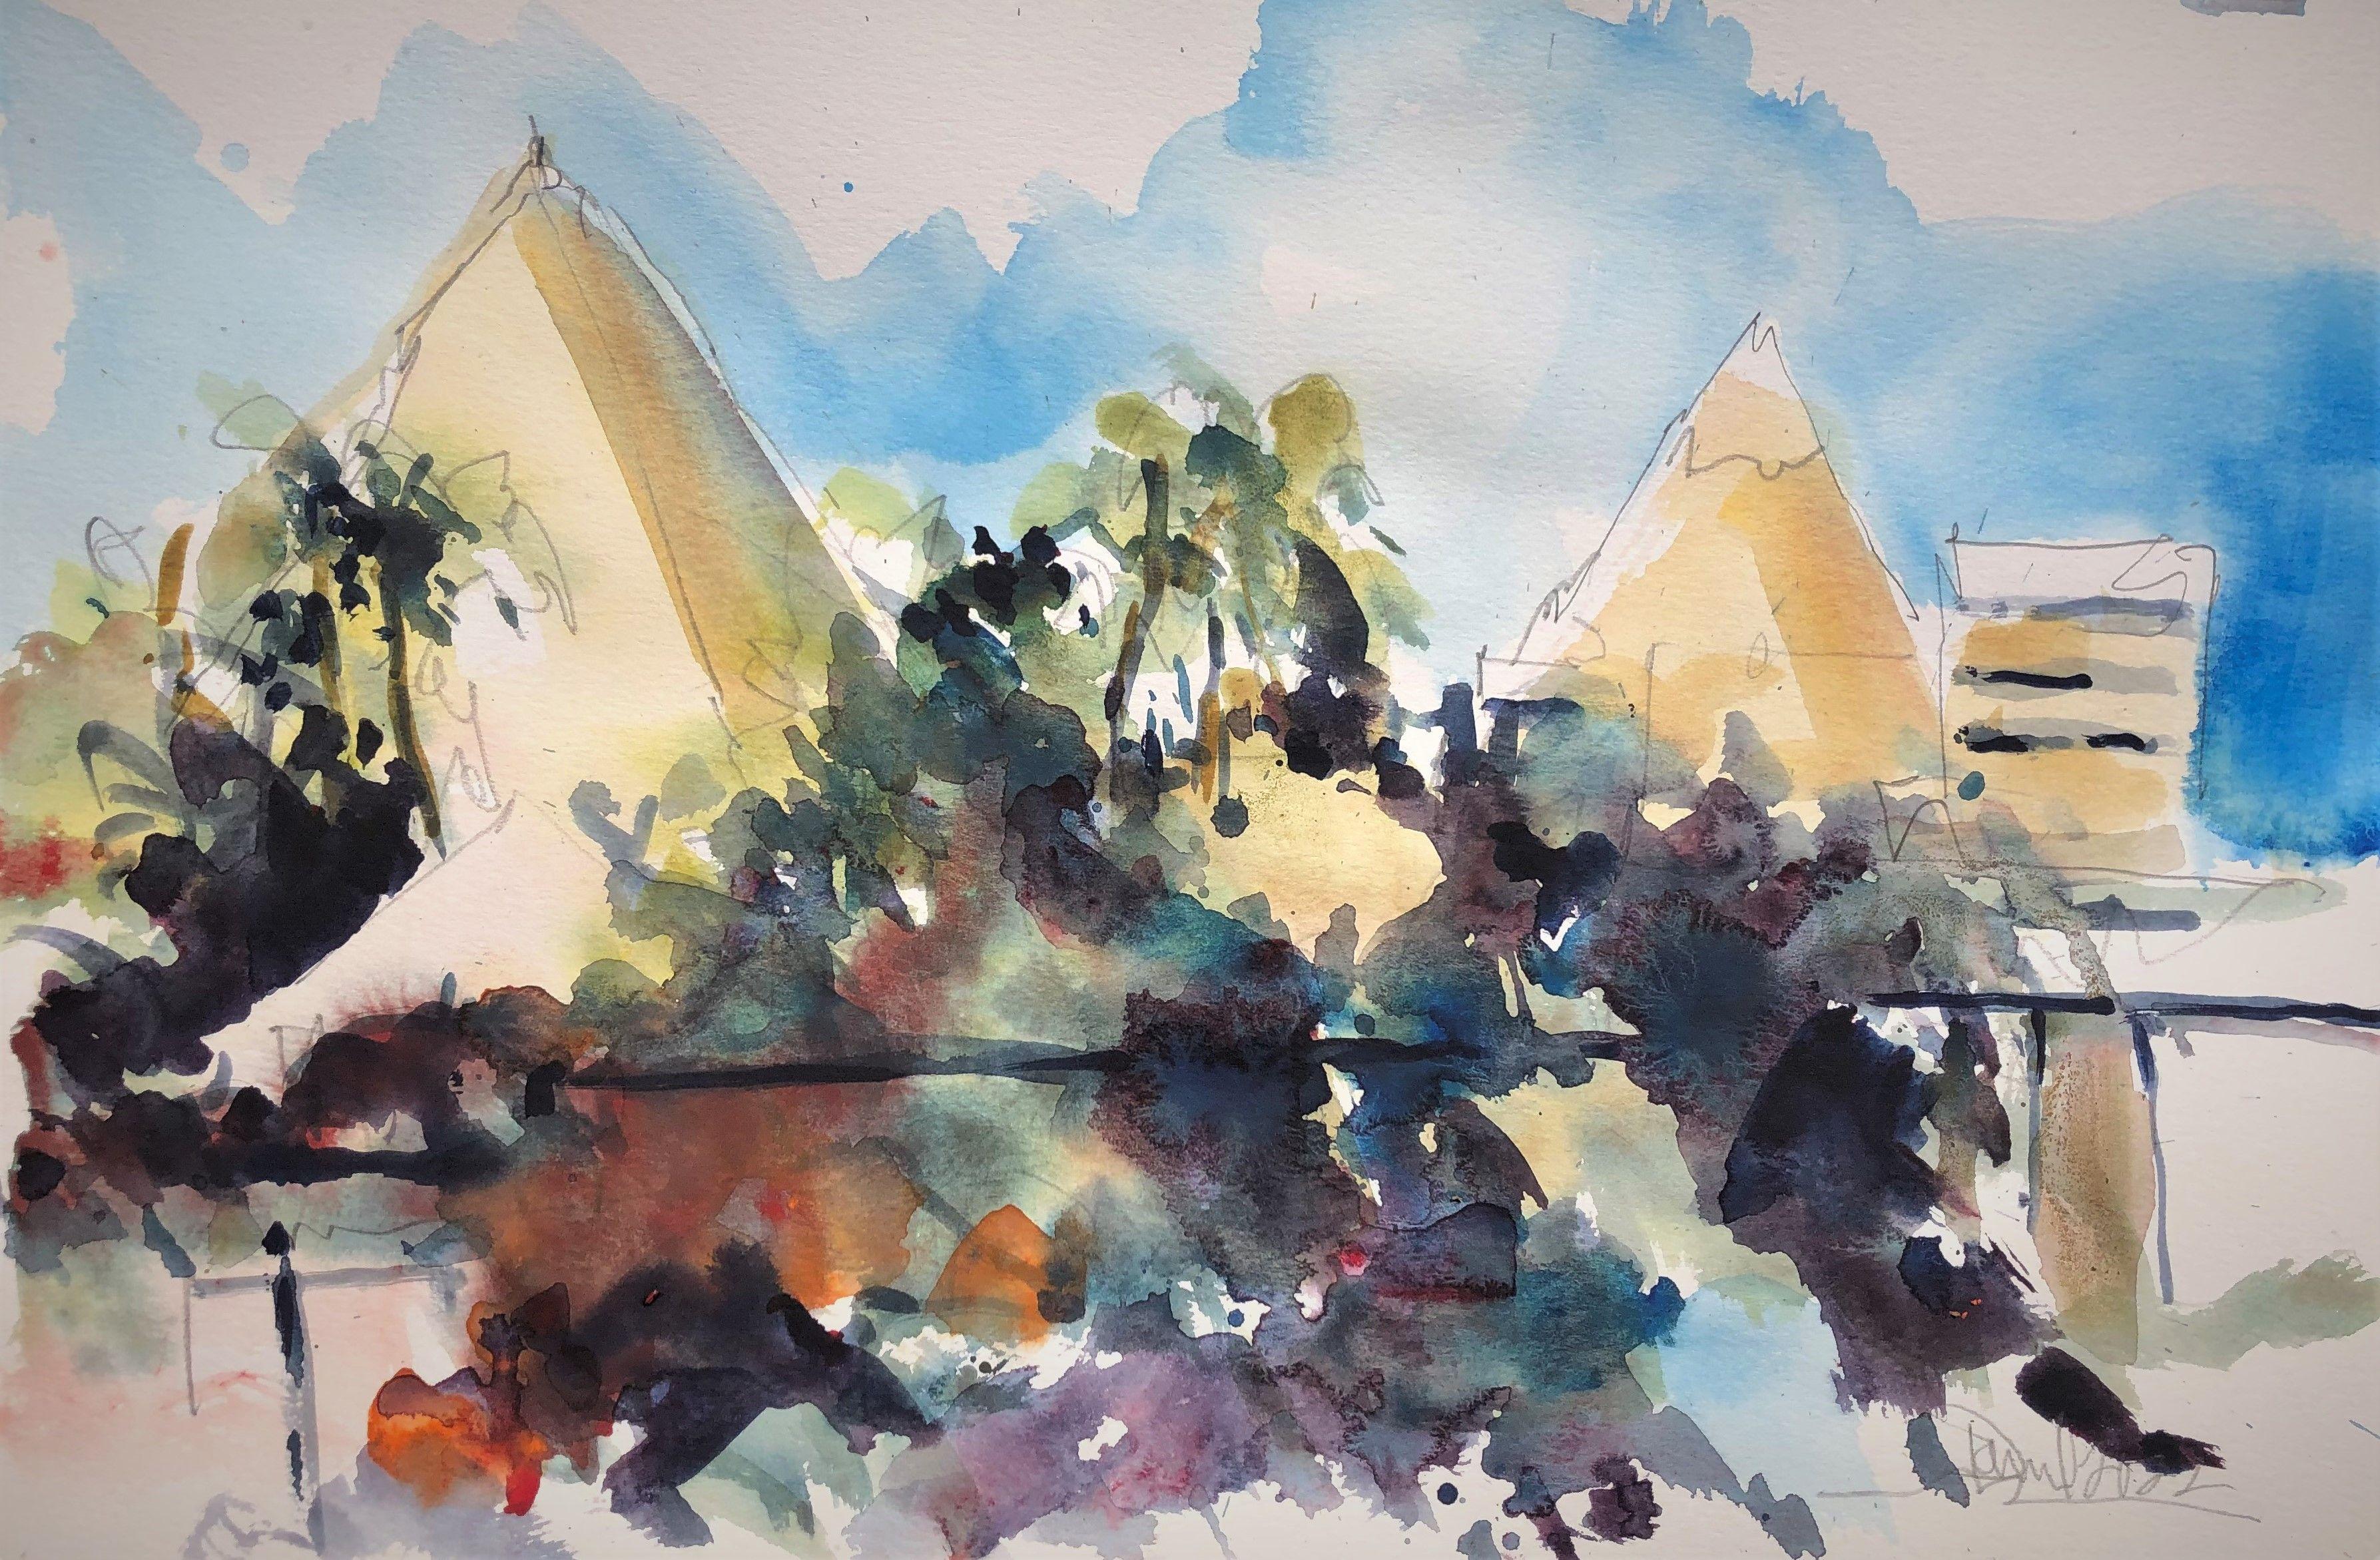 Cairo Early Morning, Painting, Watercolor on Watercolor Paper - Art by Daniel Clarke